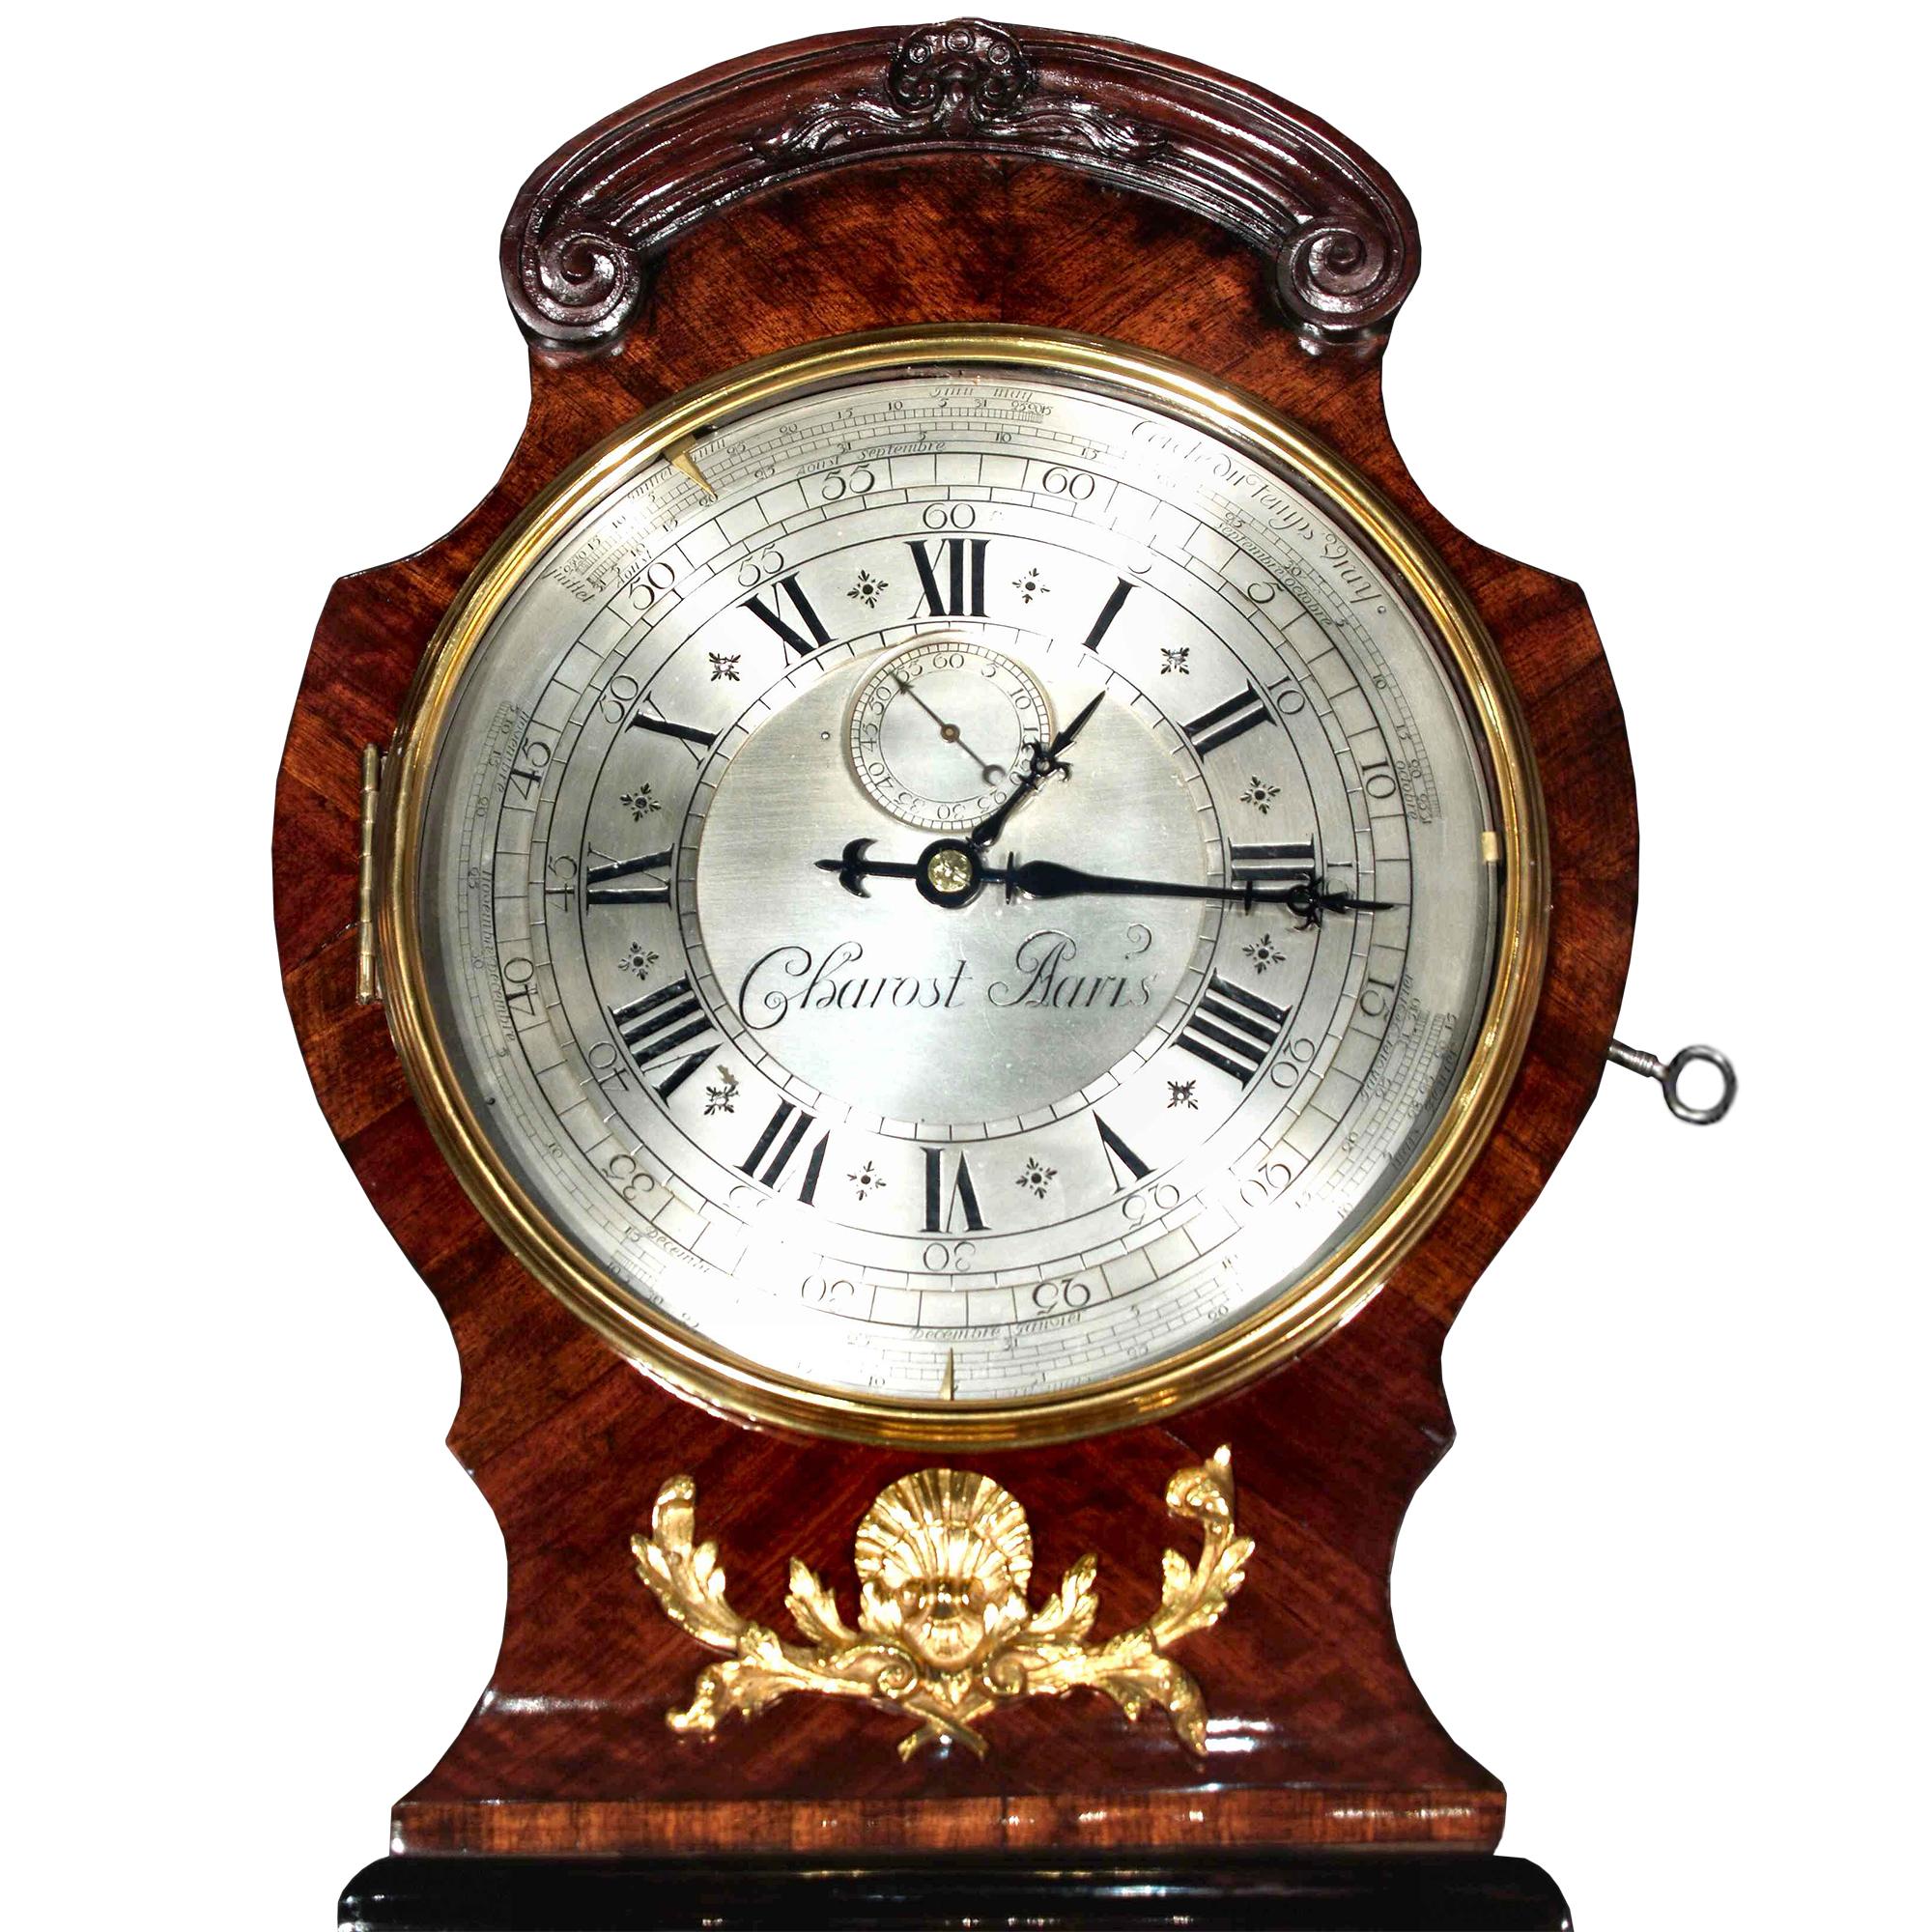 A sensational French Louis XV period, circa 1740, tall case clock with an extremely rare mechanism movement signed Jean Charost. The original case in kingwood, ebony and rosewood veneer is highly decorated by impressive ormolu mounts with a female